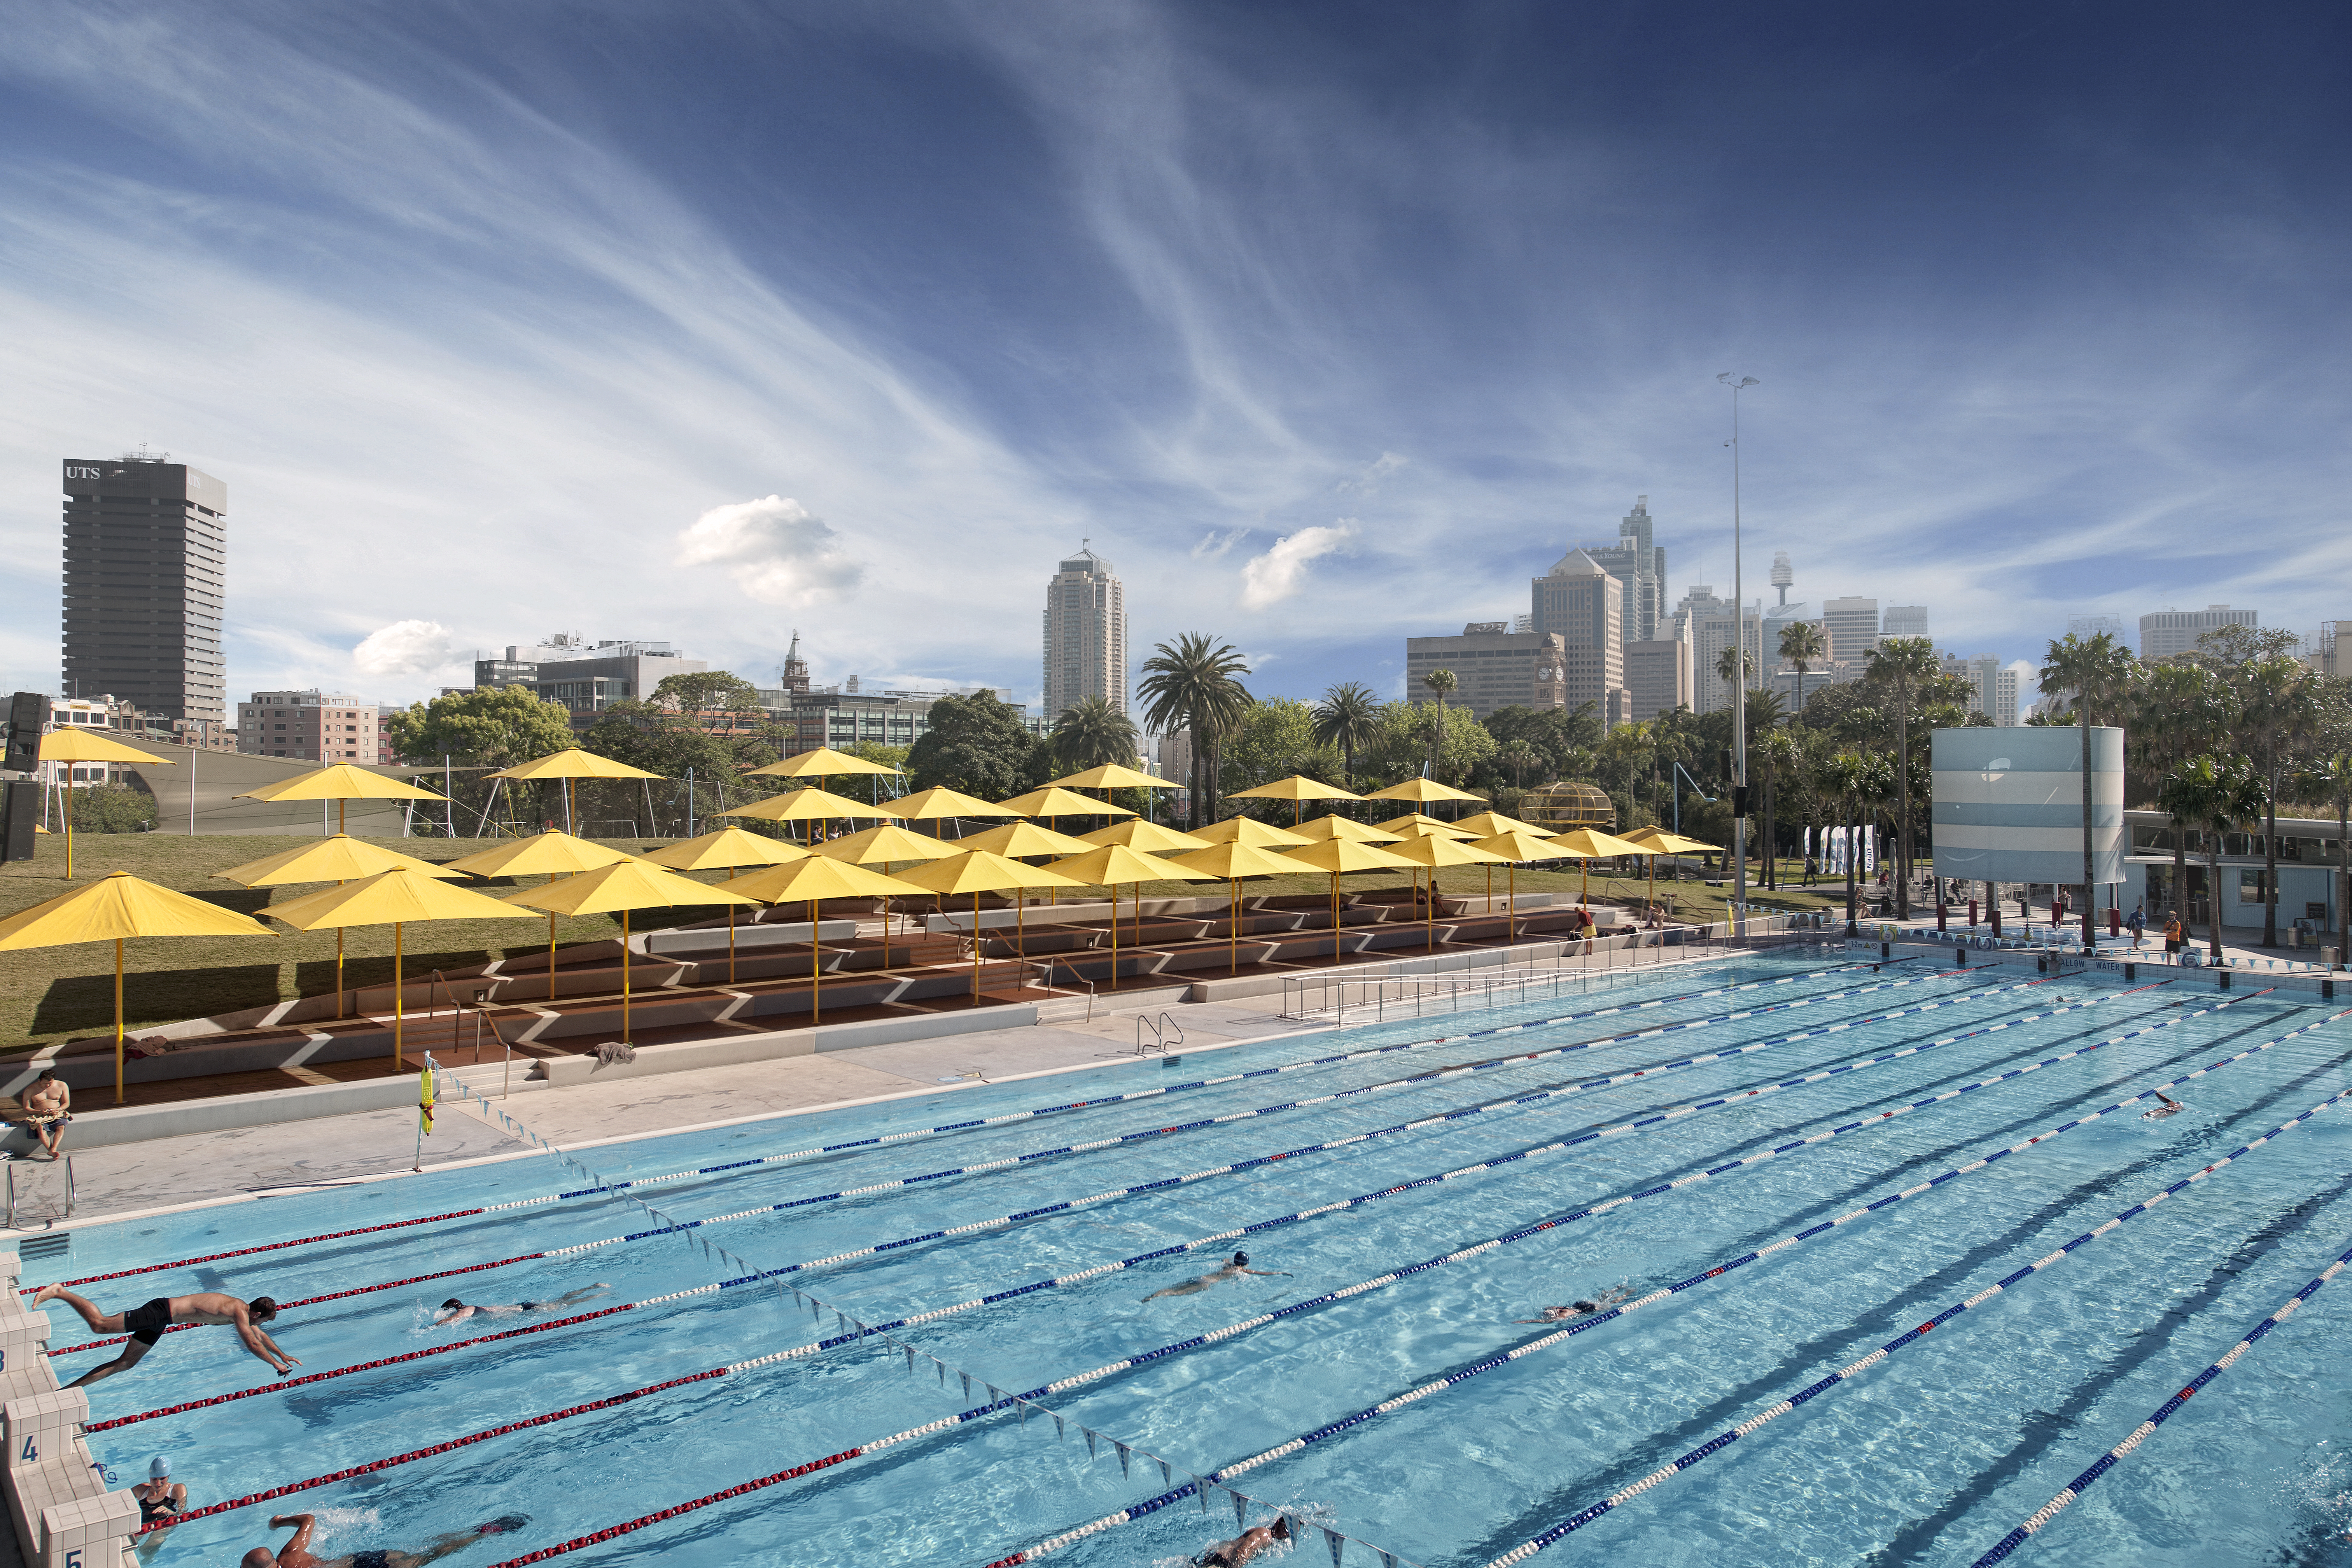 Prince Alfred Park Pool, designed by Neeson Murcutt Architects and Sue Barnsley Design in association with City of Sydney. Image: Josef Nalevansky